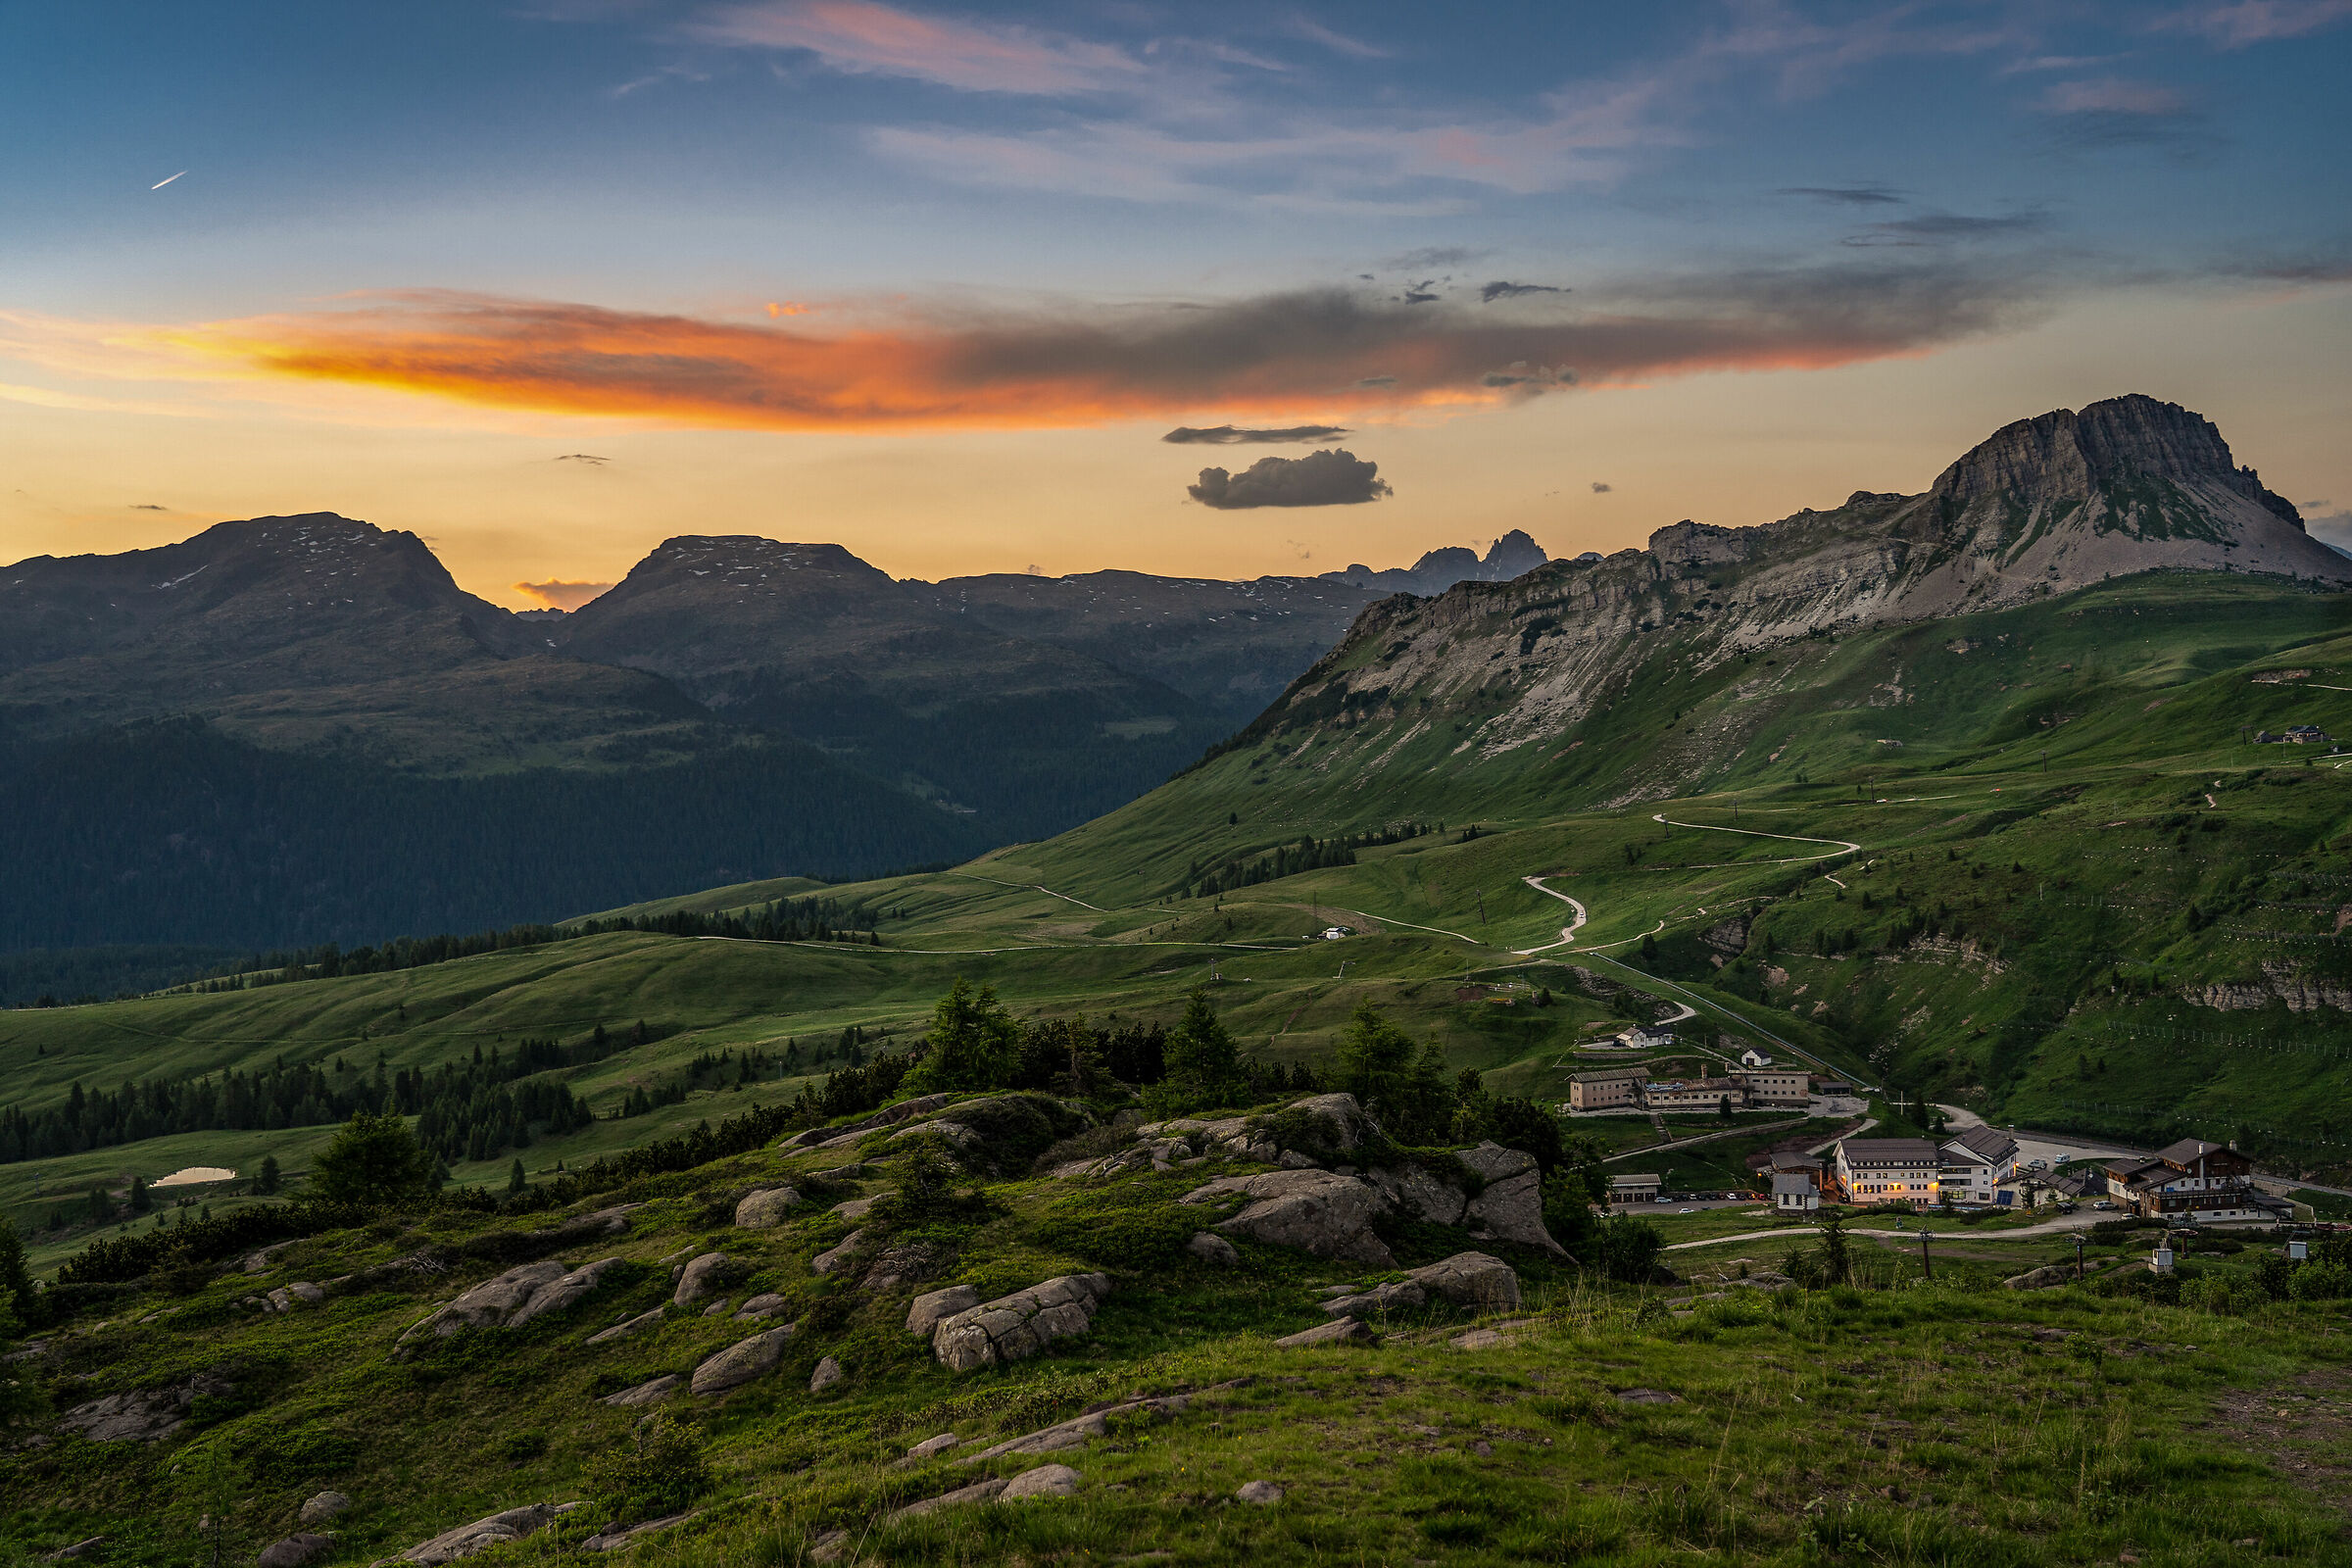 The evening falls at Rolle Pass...